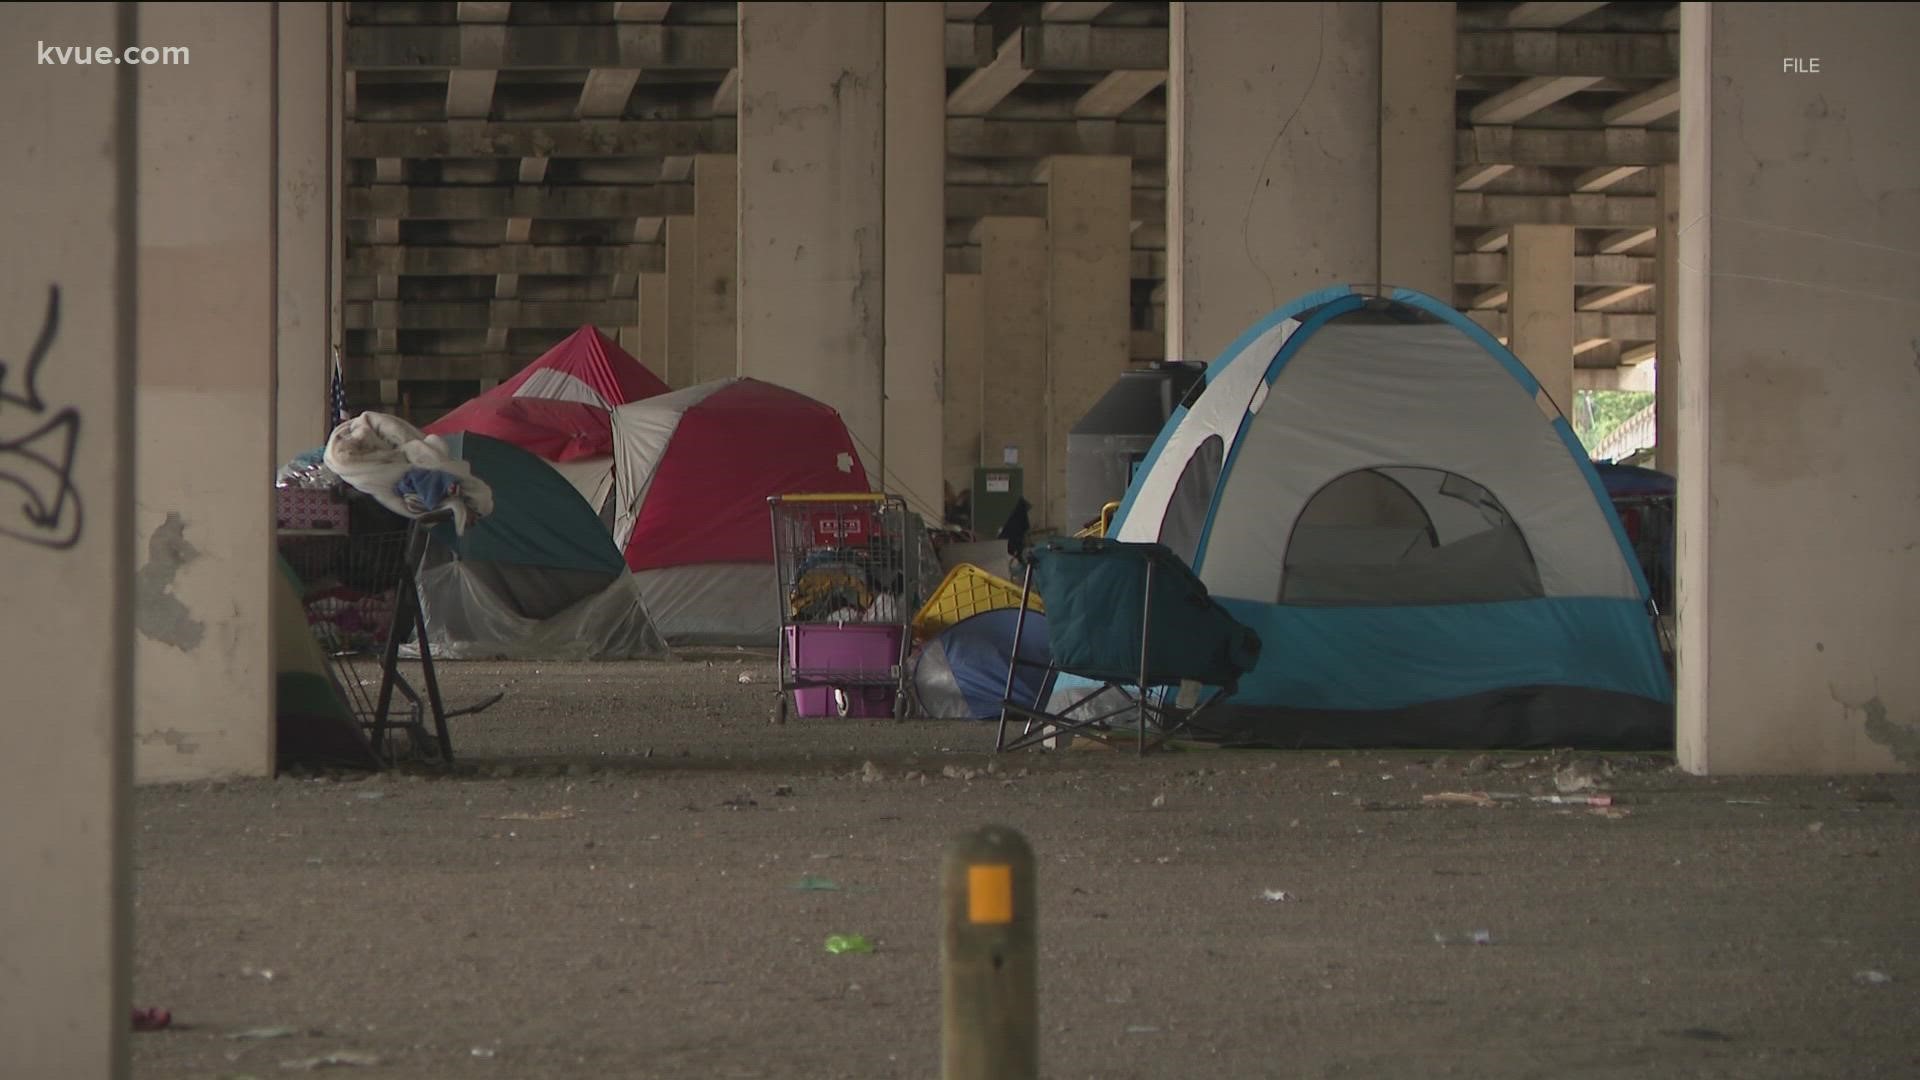 The Travis County Commissioners Court approved $110 million in American Rescue Plan Act funding to help individuals experiencing homelessness on Tuesday.